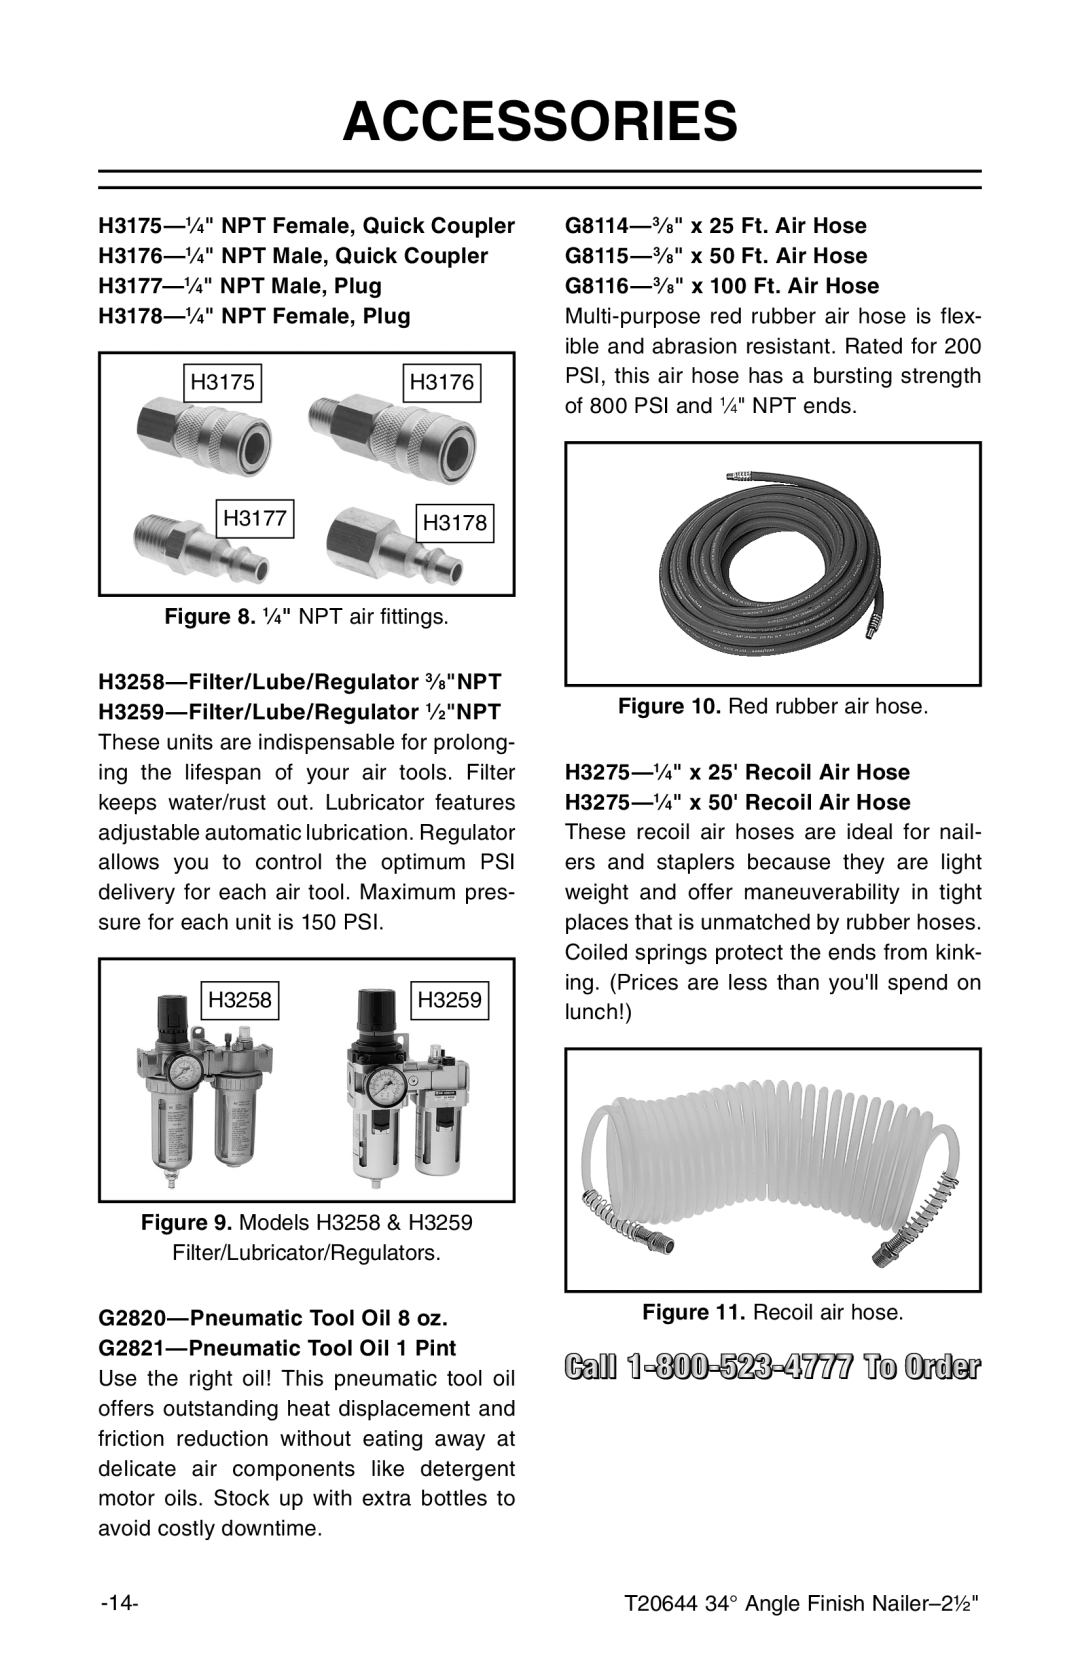 Grizzly T20644 instruction manual Accessories 